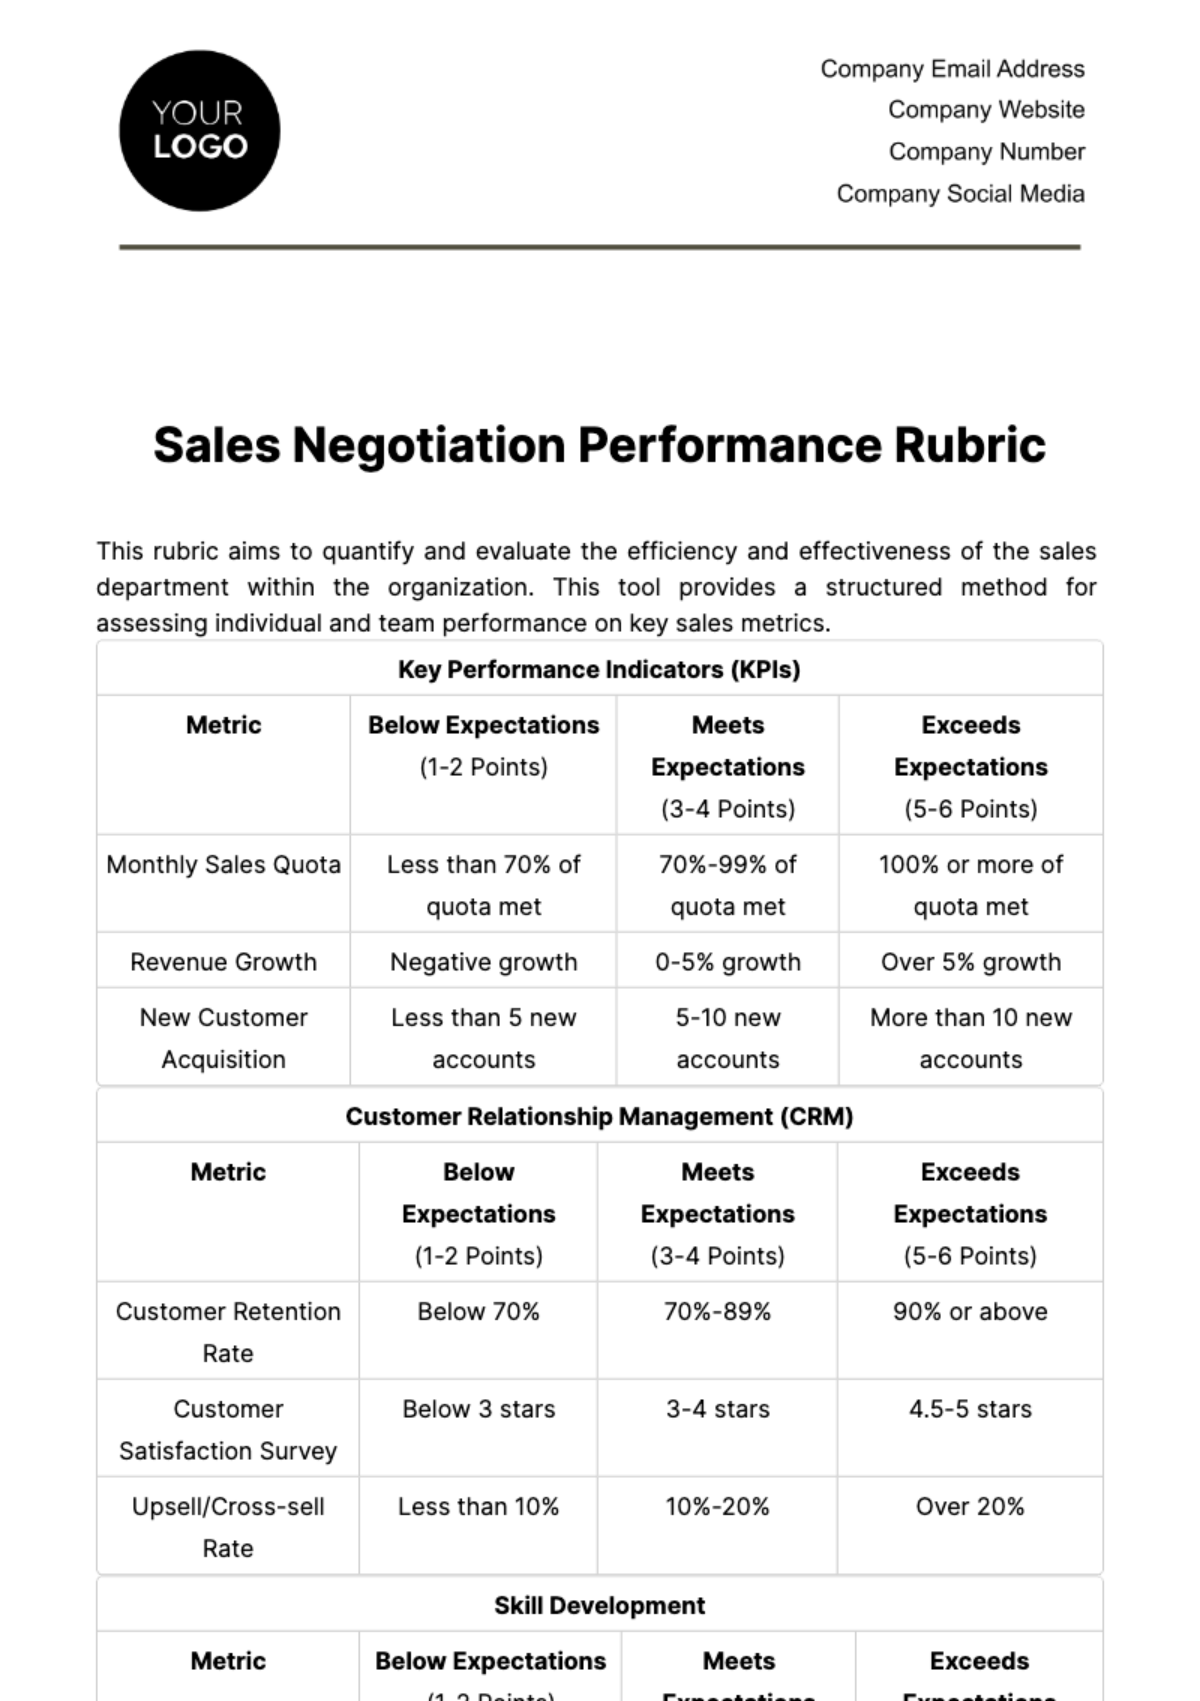 Free Sales Negotiation Performance Rubric Template